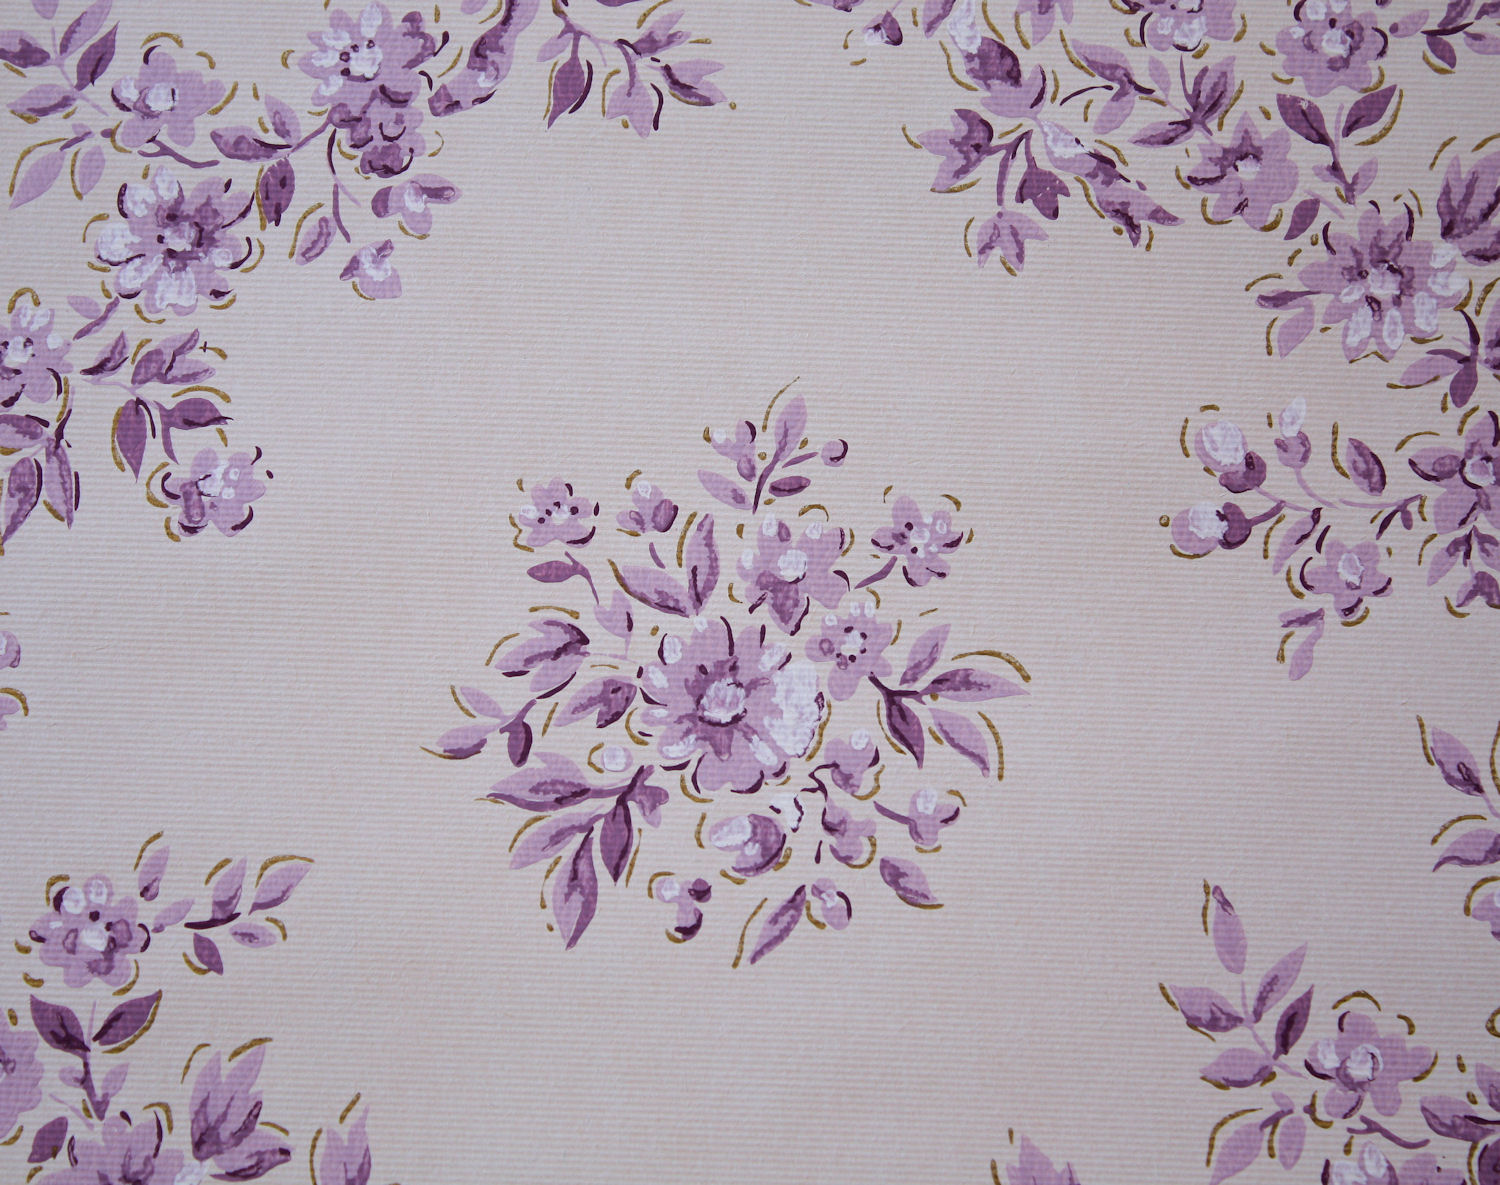 Floral vintage light purple background. Wallpapers of flowers